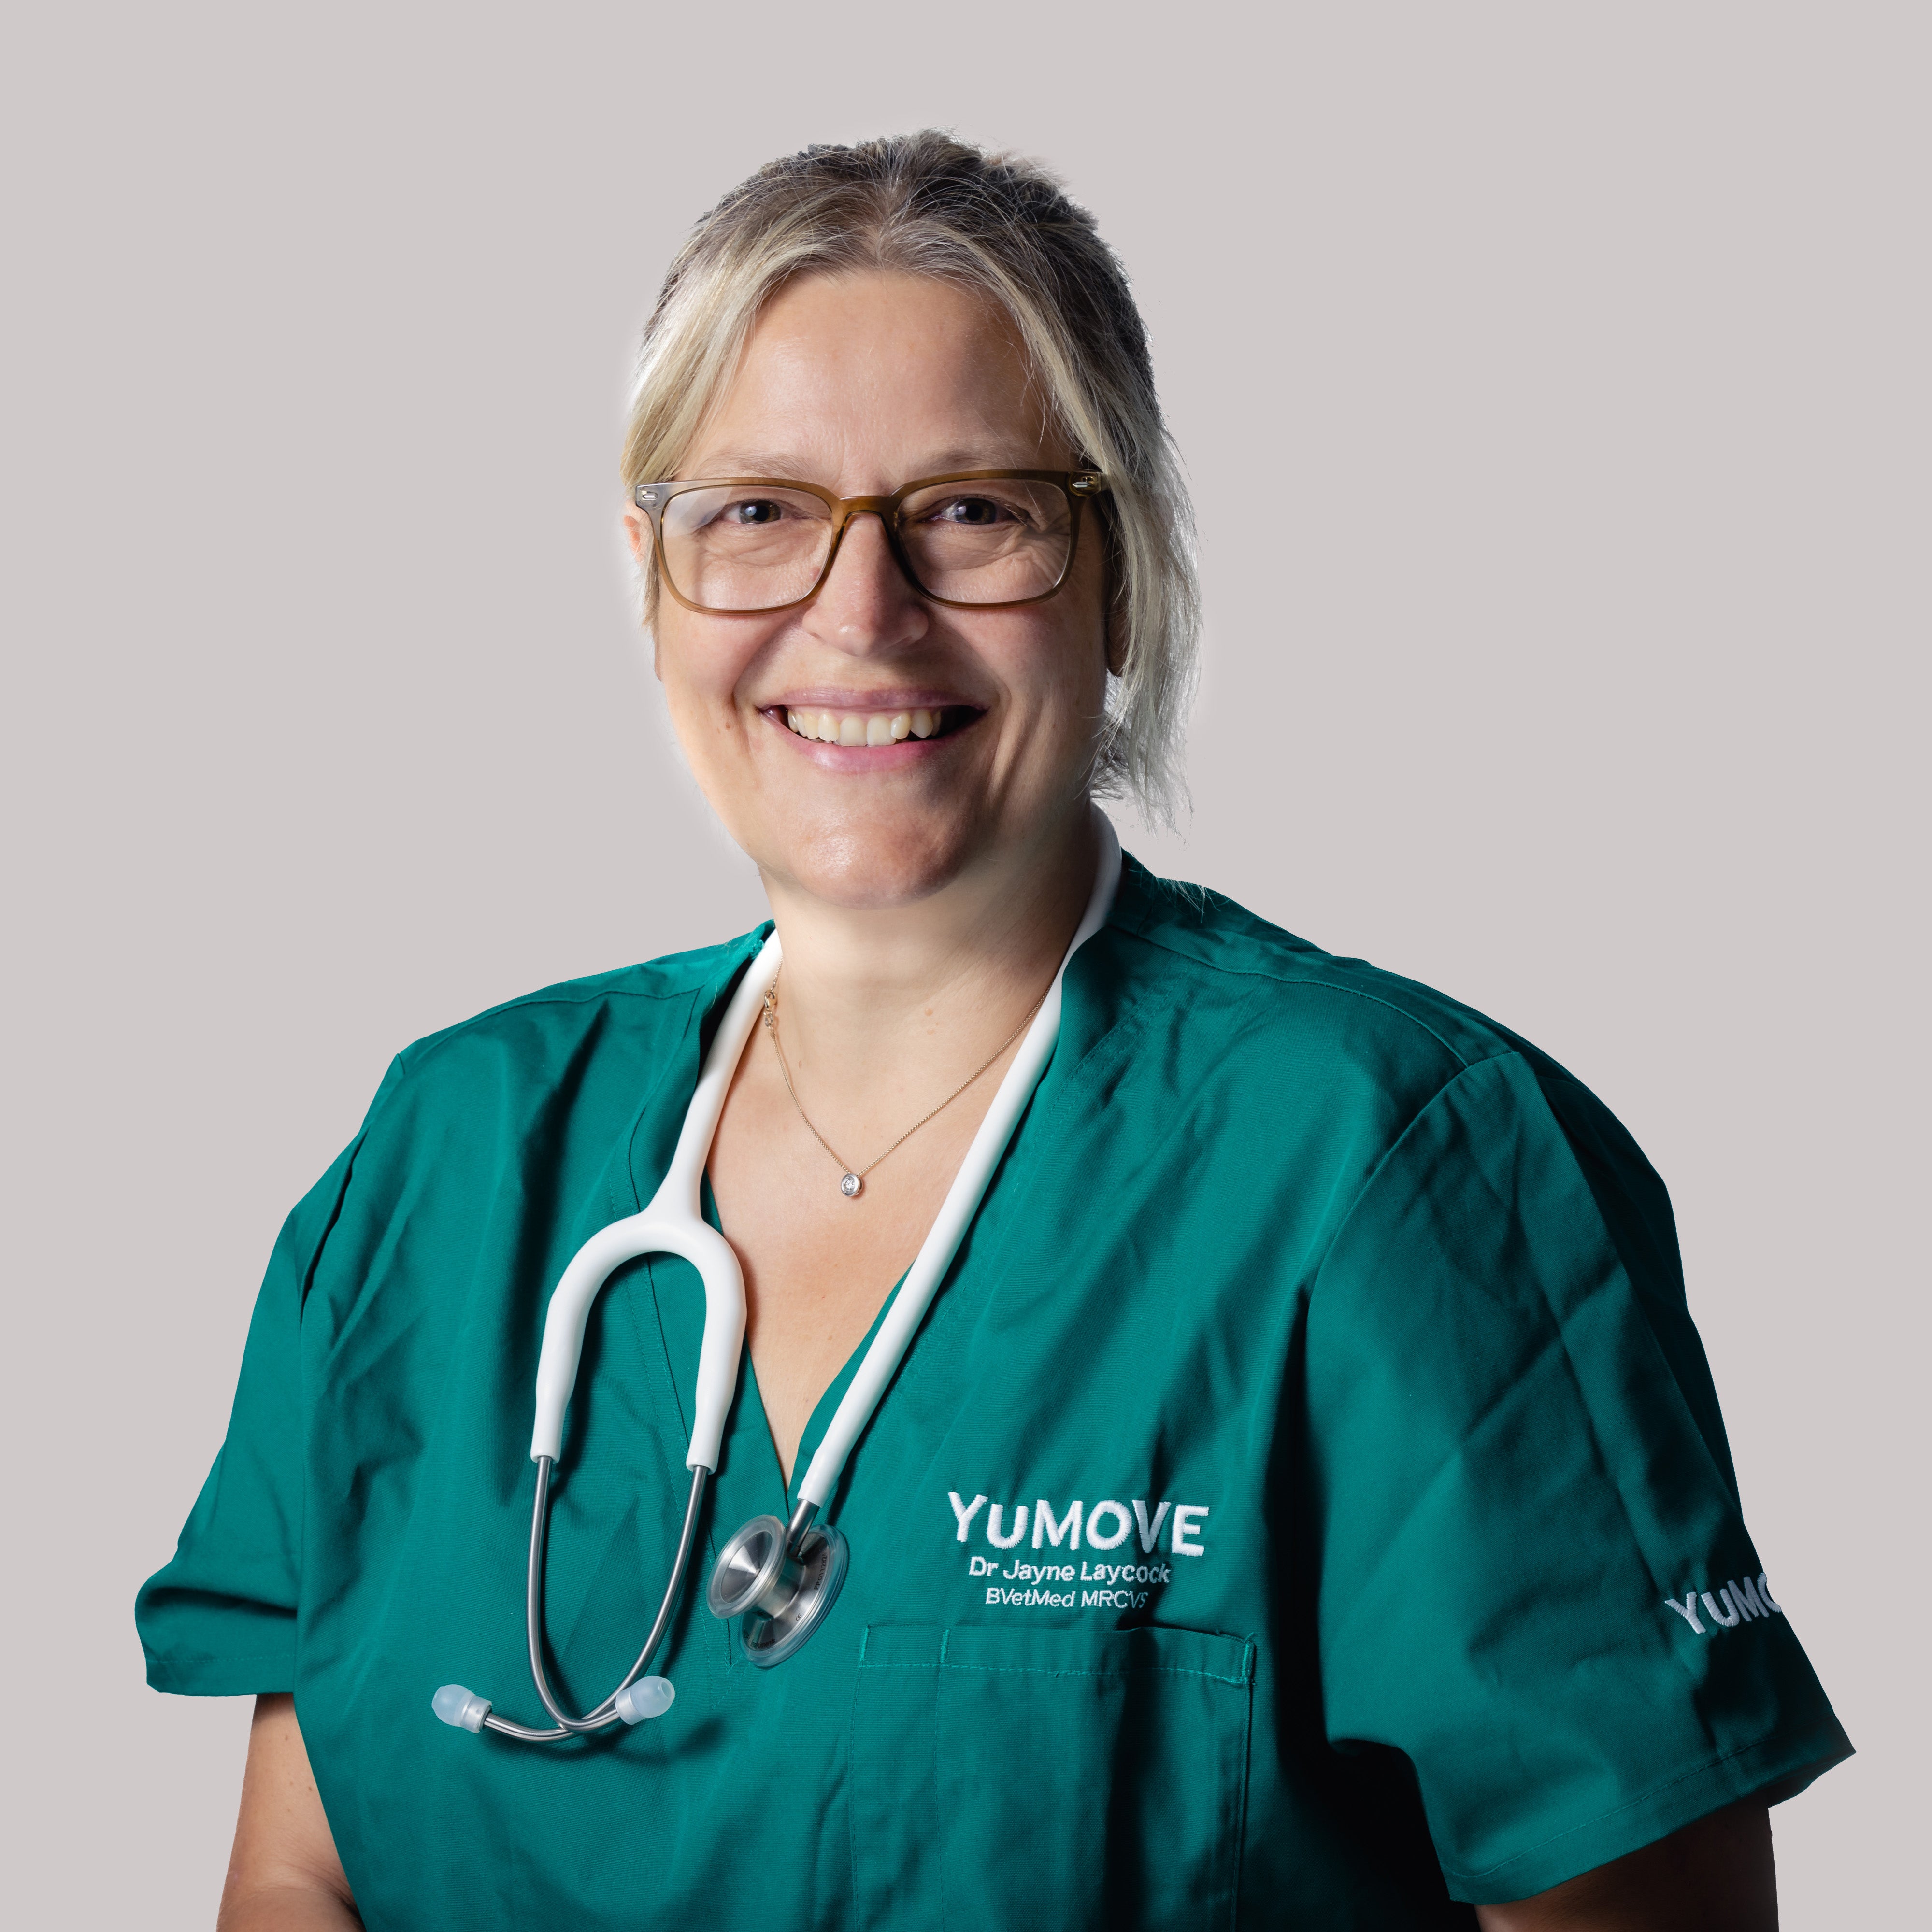 This image is of Dr. Jayne Laycock, Veterinary Technical Lead at YuMOVE, wearing green YuMOVE branded scrubs and a stethoscope in front of a plain white background.